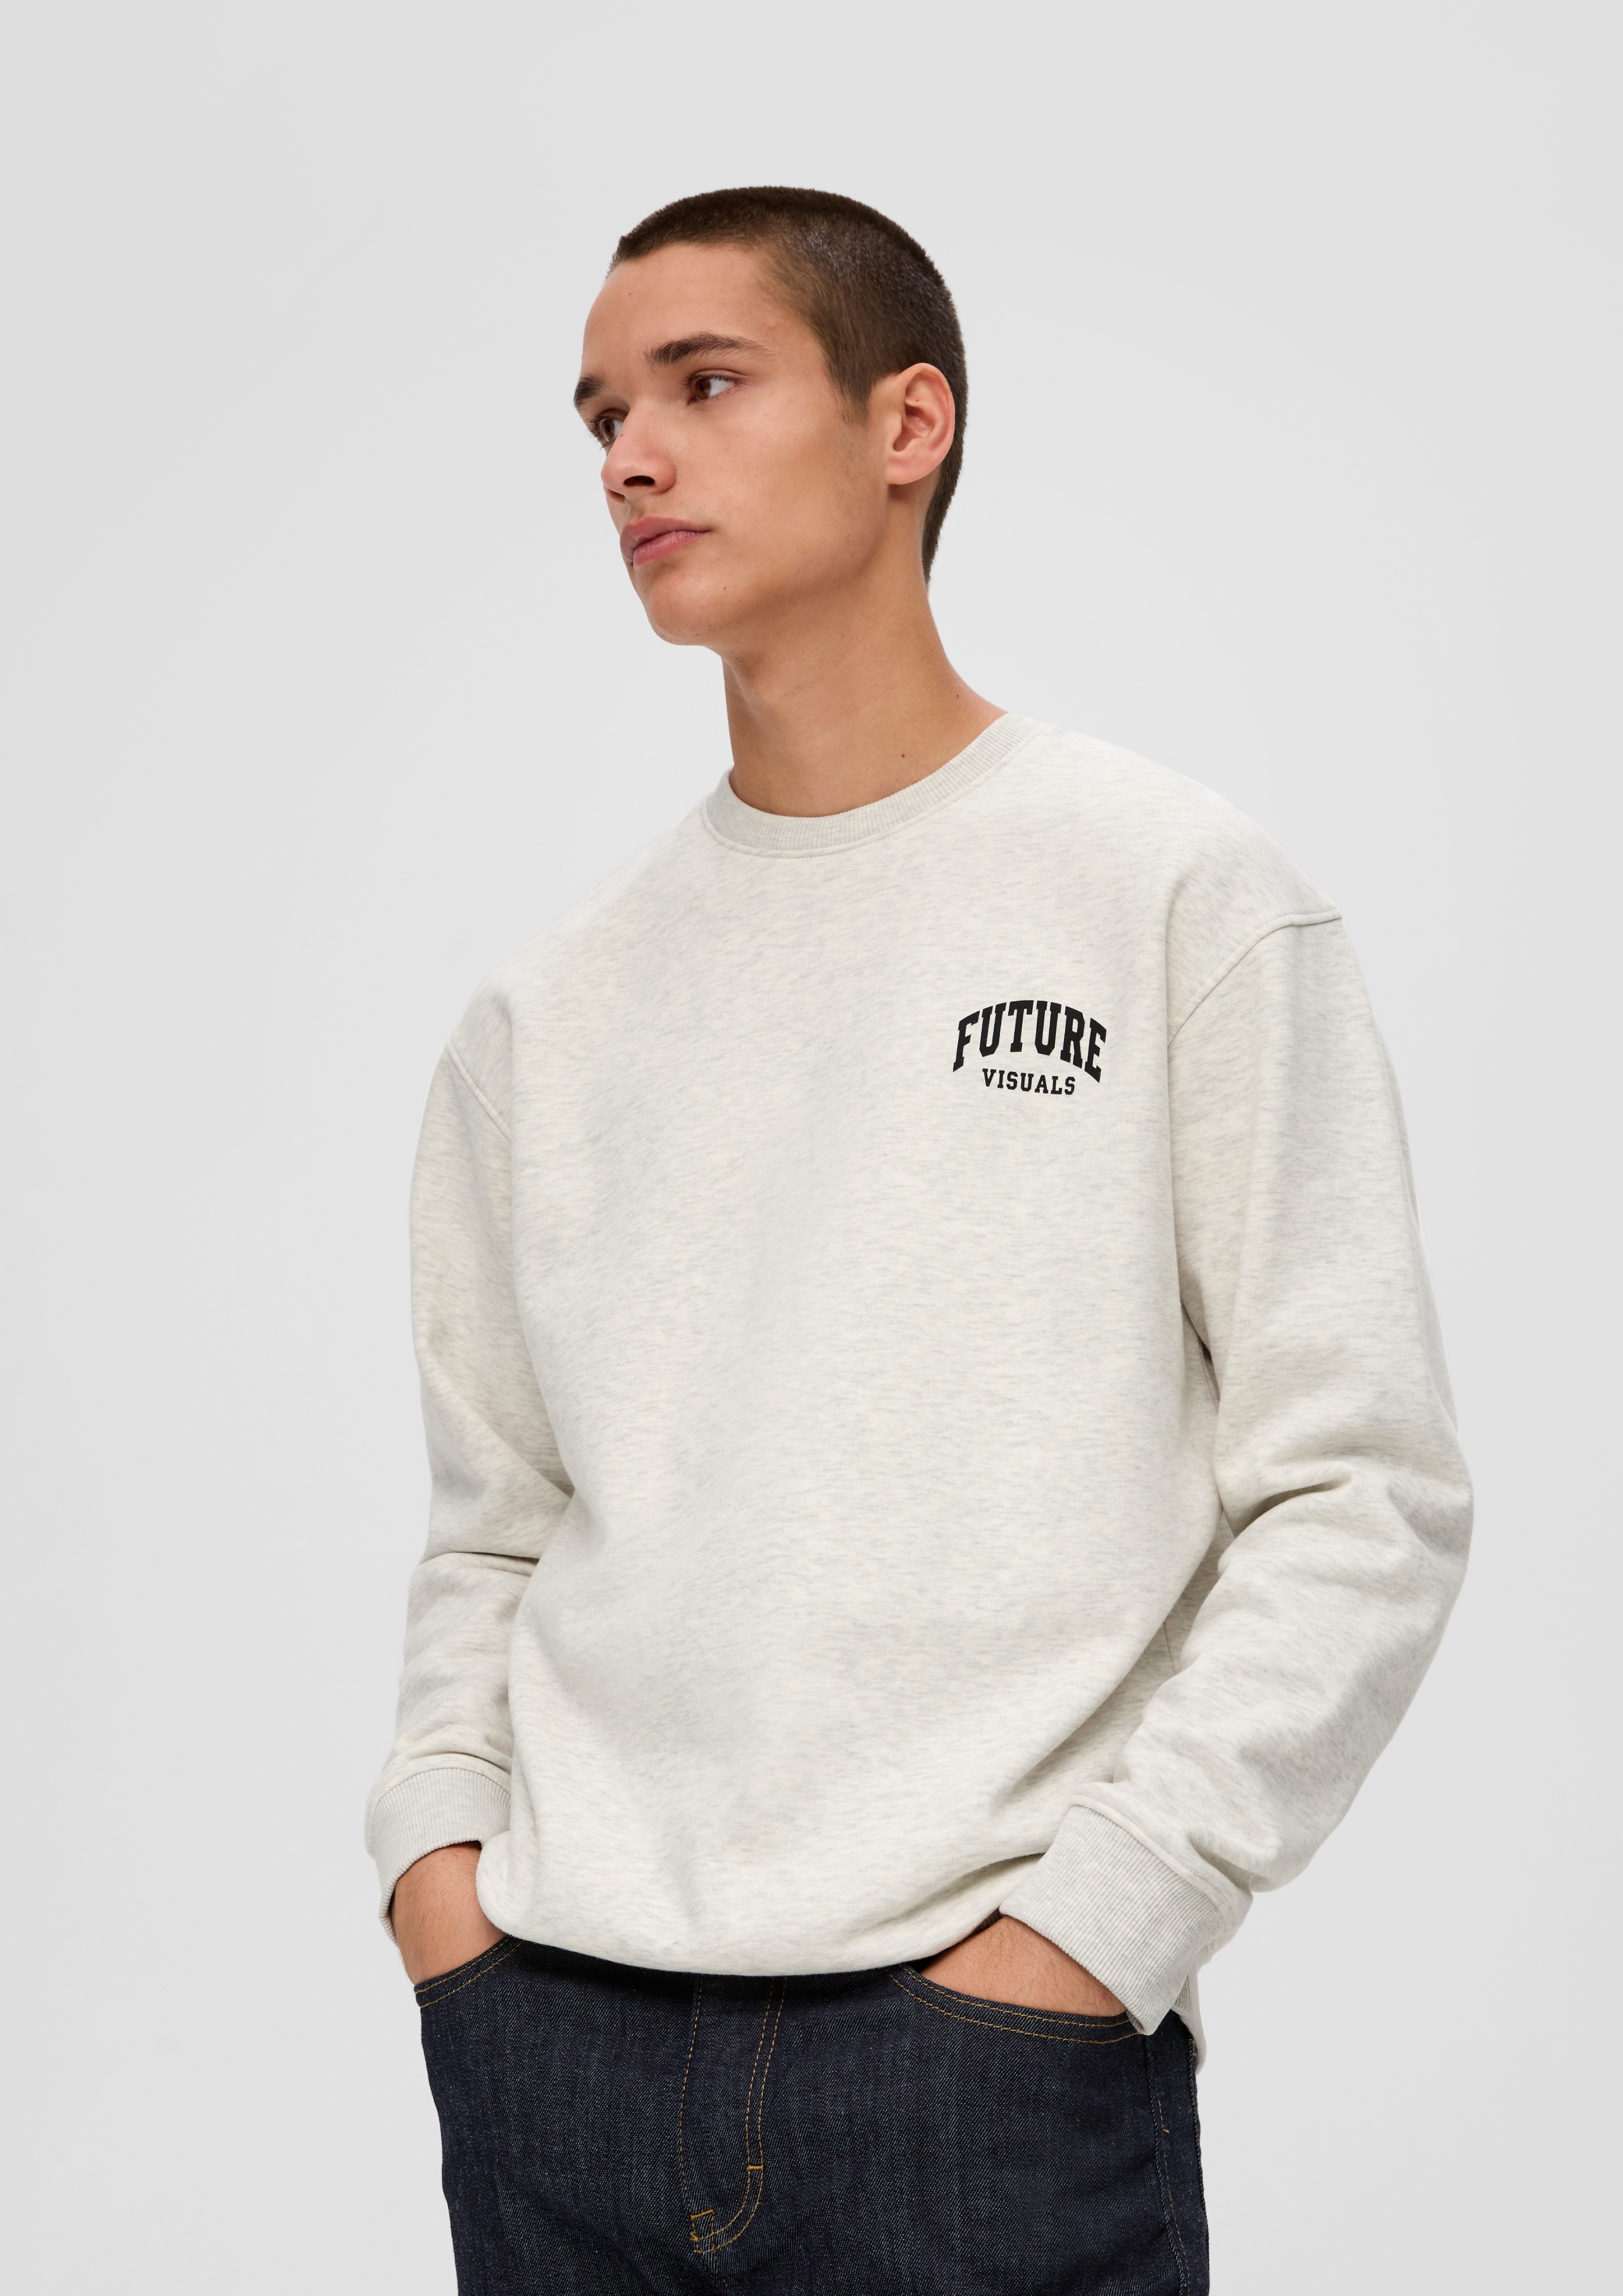 print back - Sweatshirt white with large a